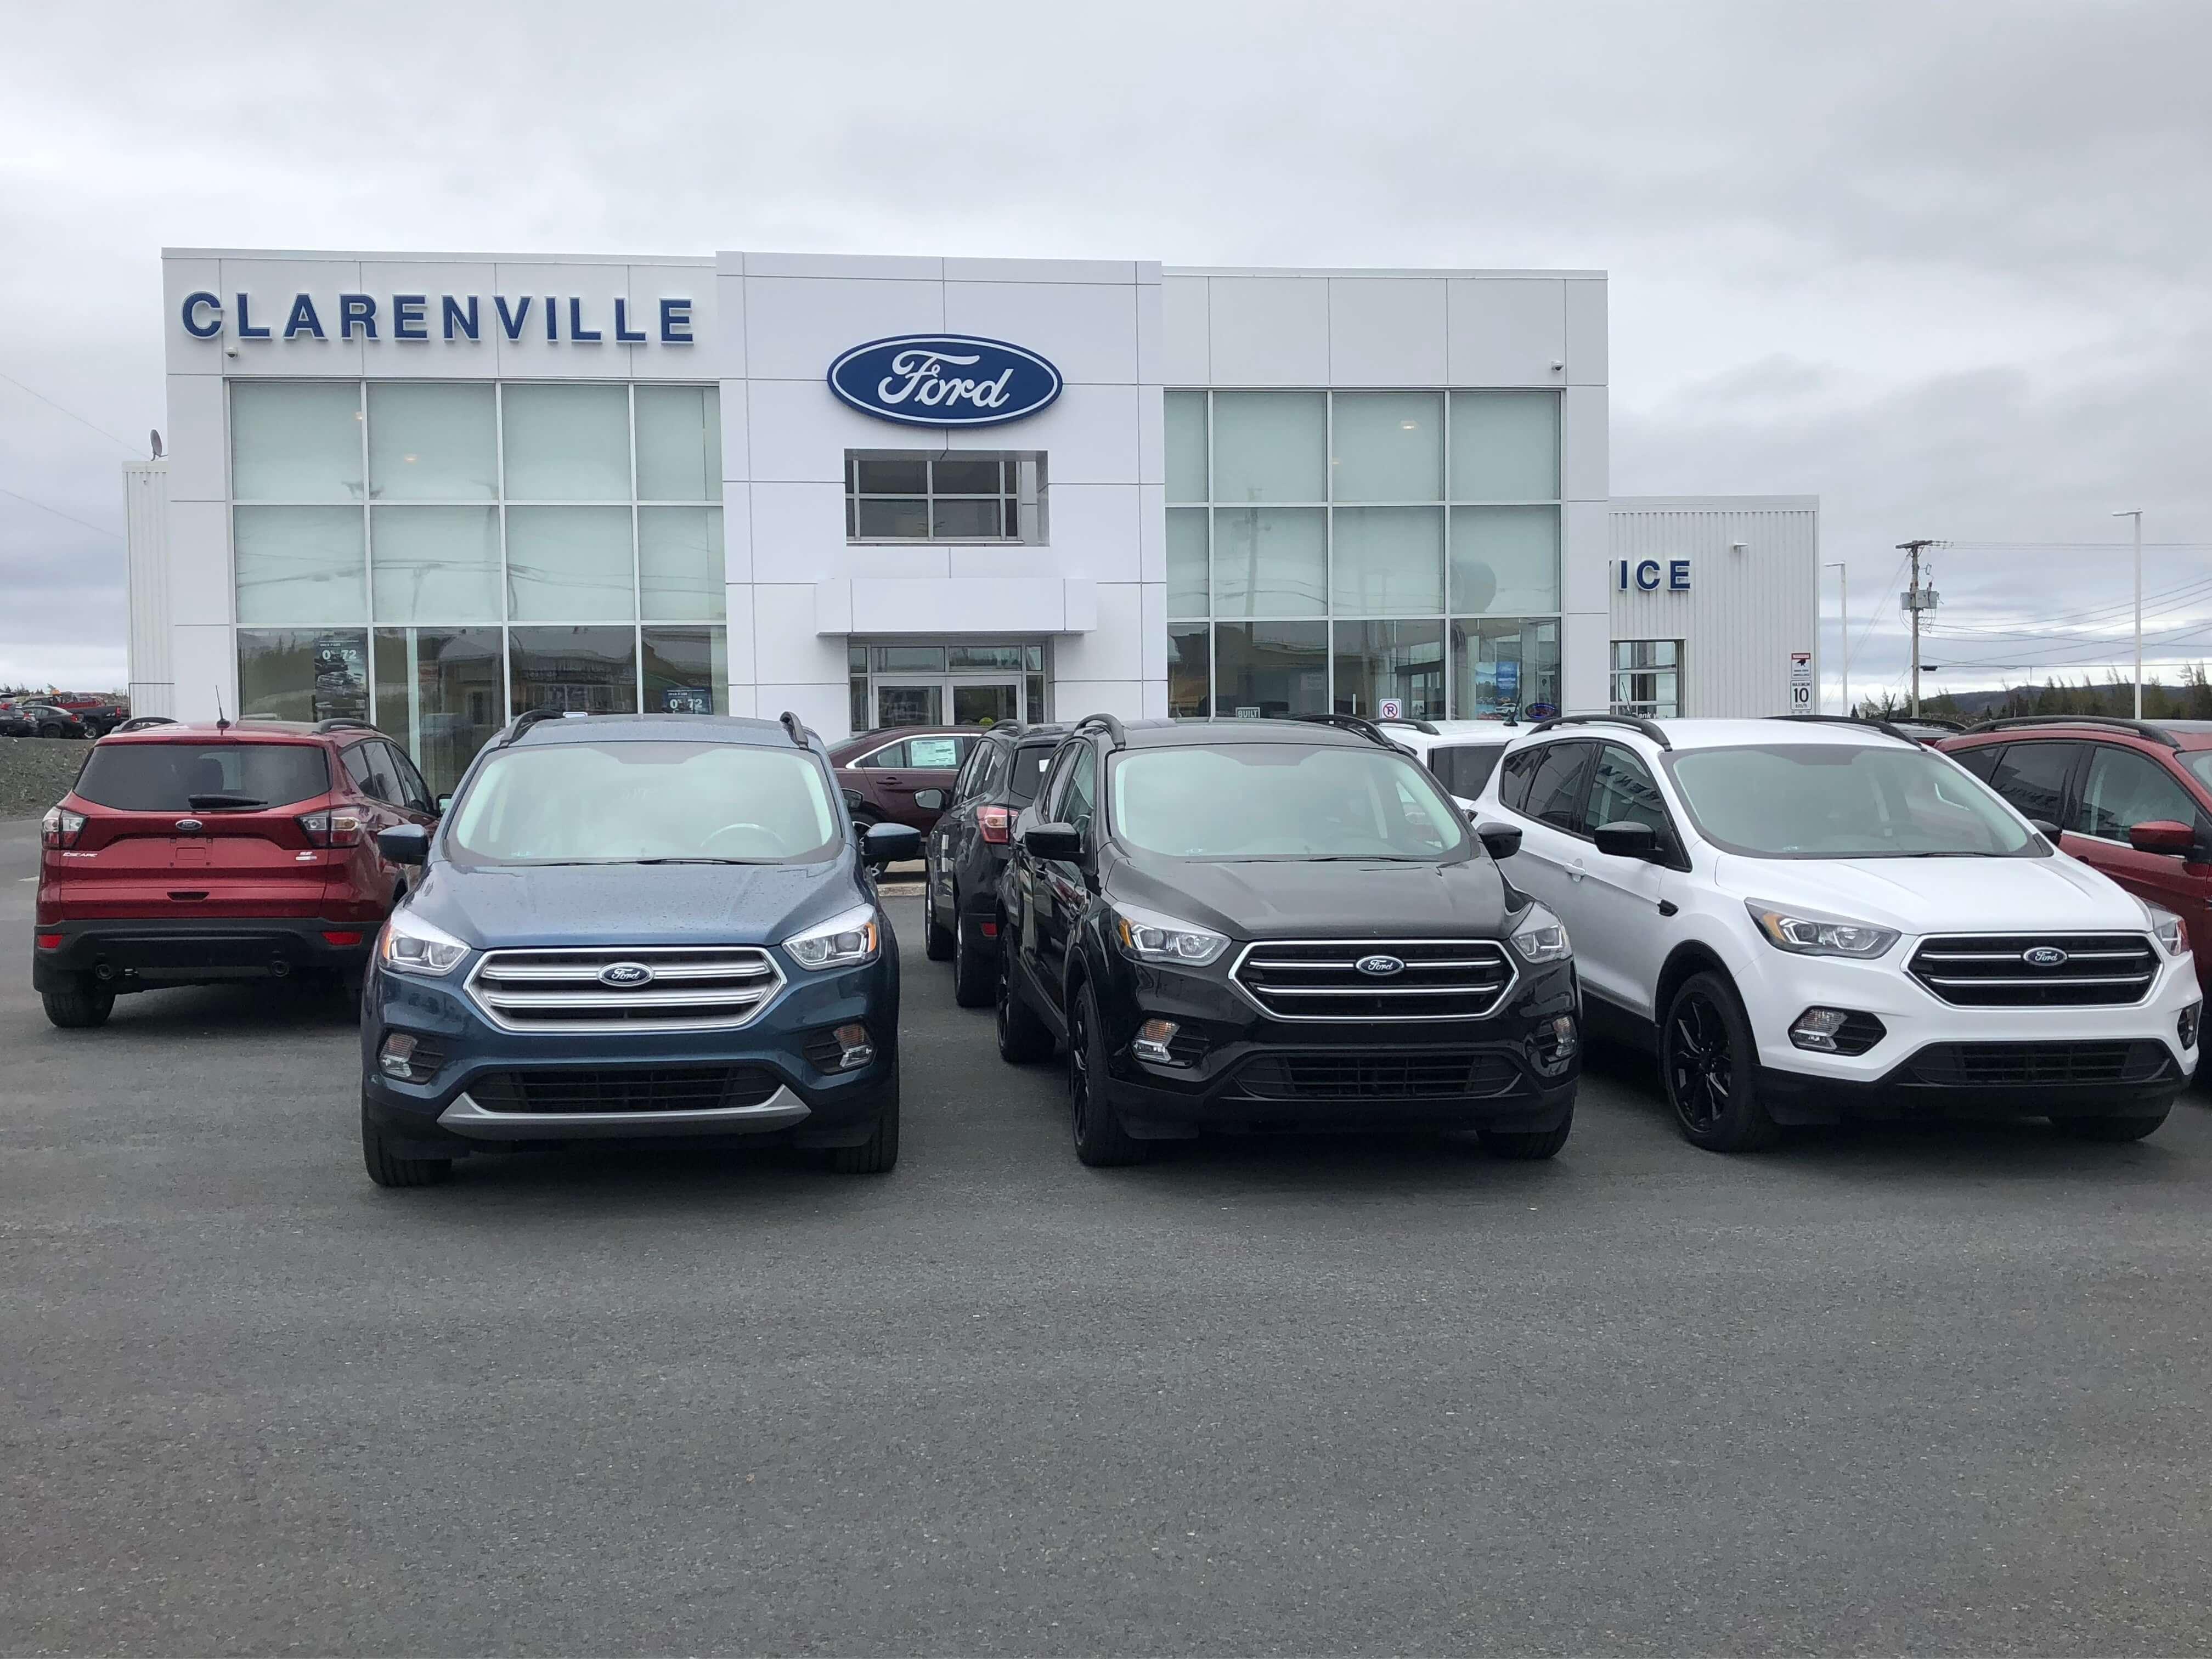 Clarenville Ford